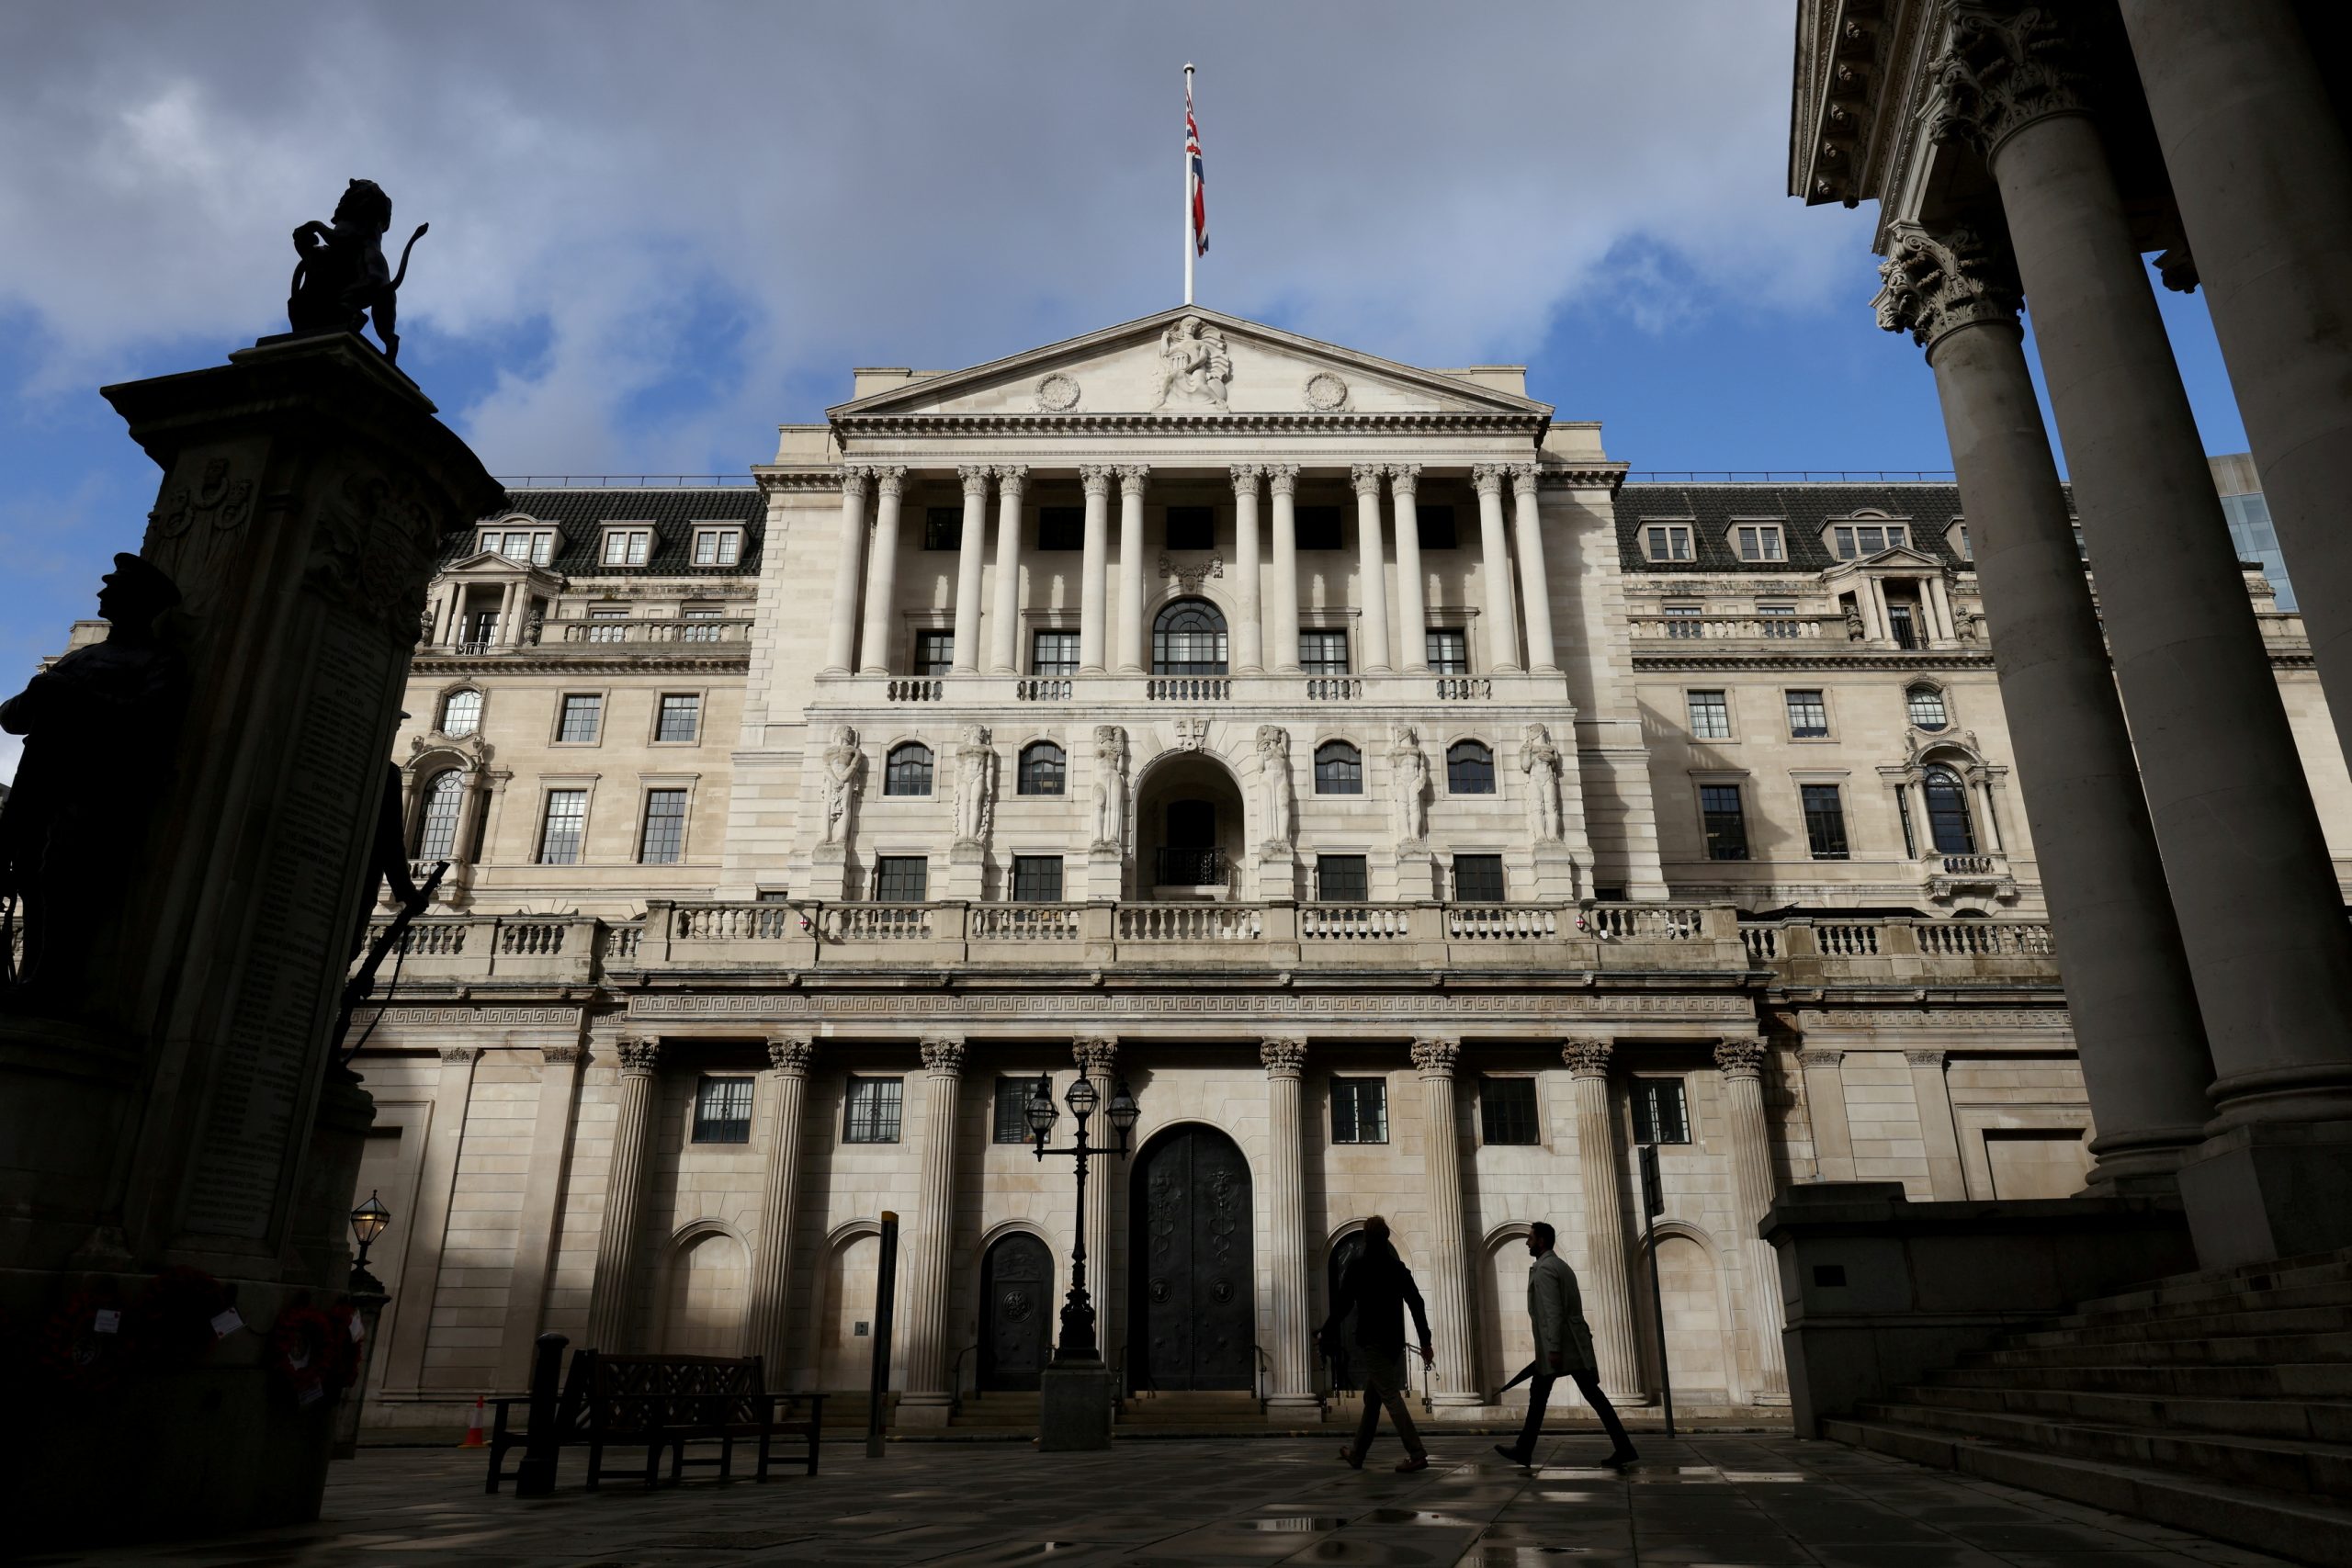 QNB: Bank of England May Be Talking Tough, But Will Act Gently